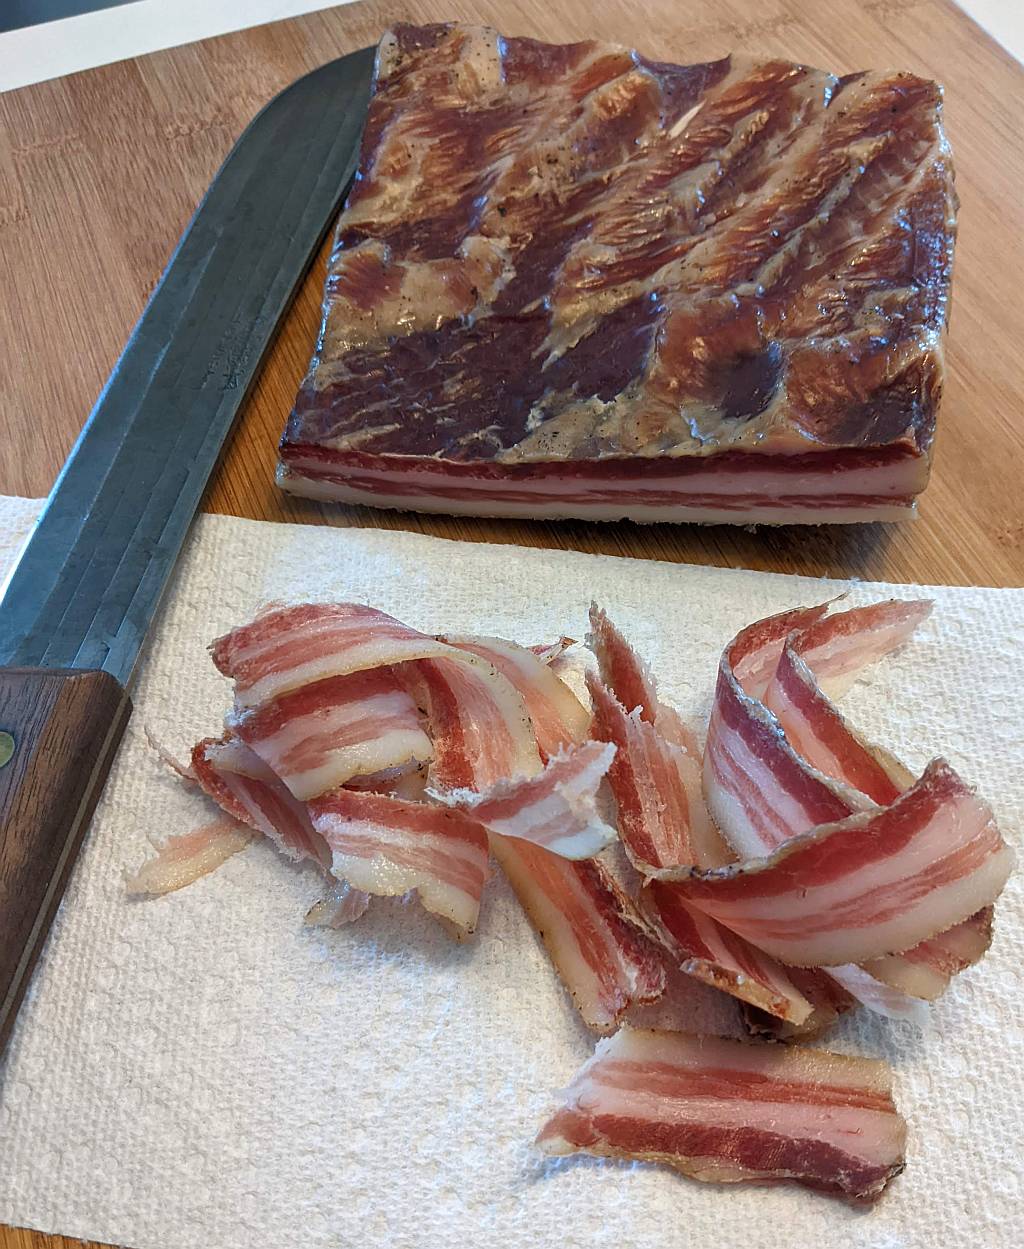 fully cured DIY pancetta on the cutting board ready for a taste test